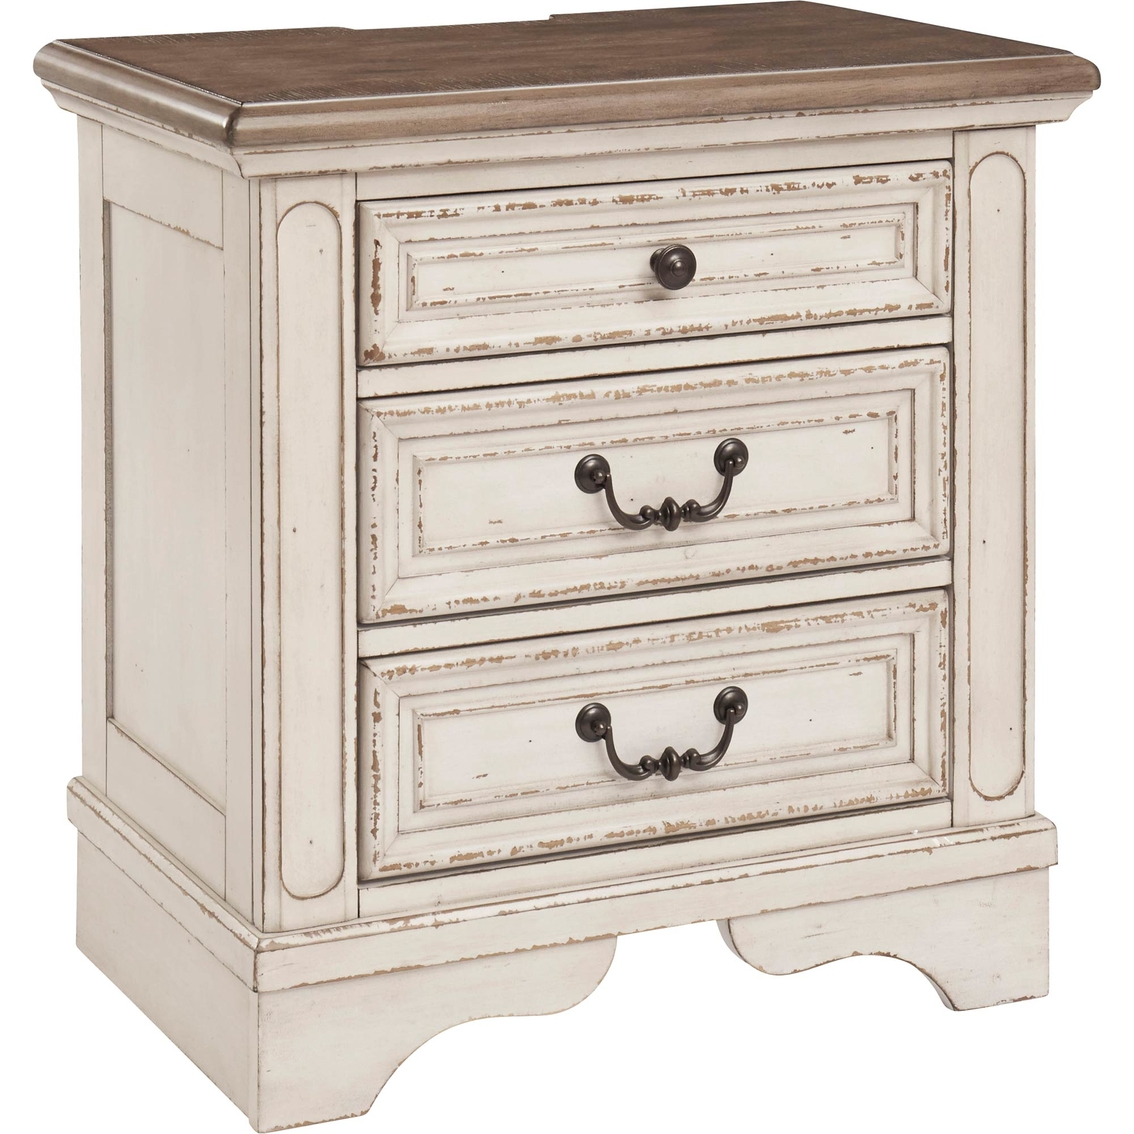 Signature Design by Ashley Realyn 3 Drawer Nightstand - Image 2 of 4